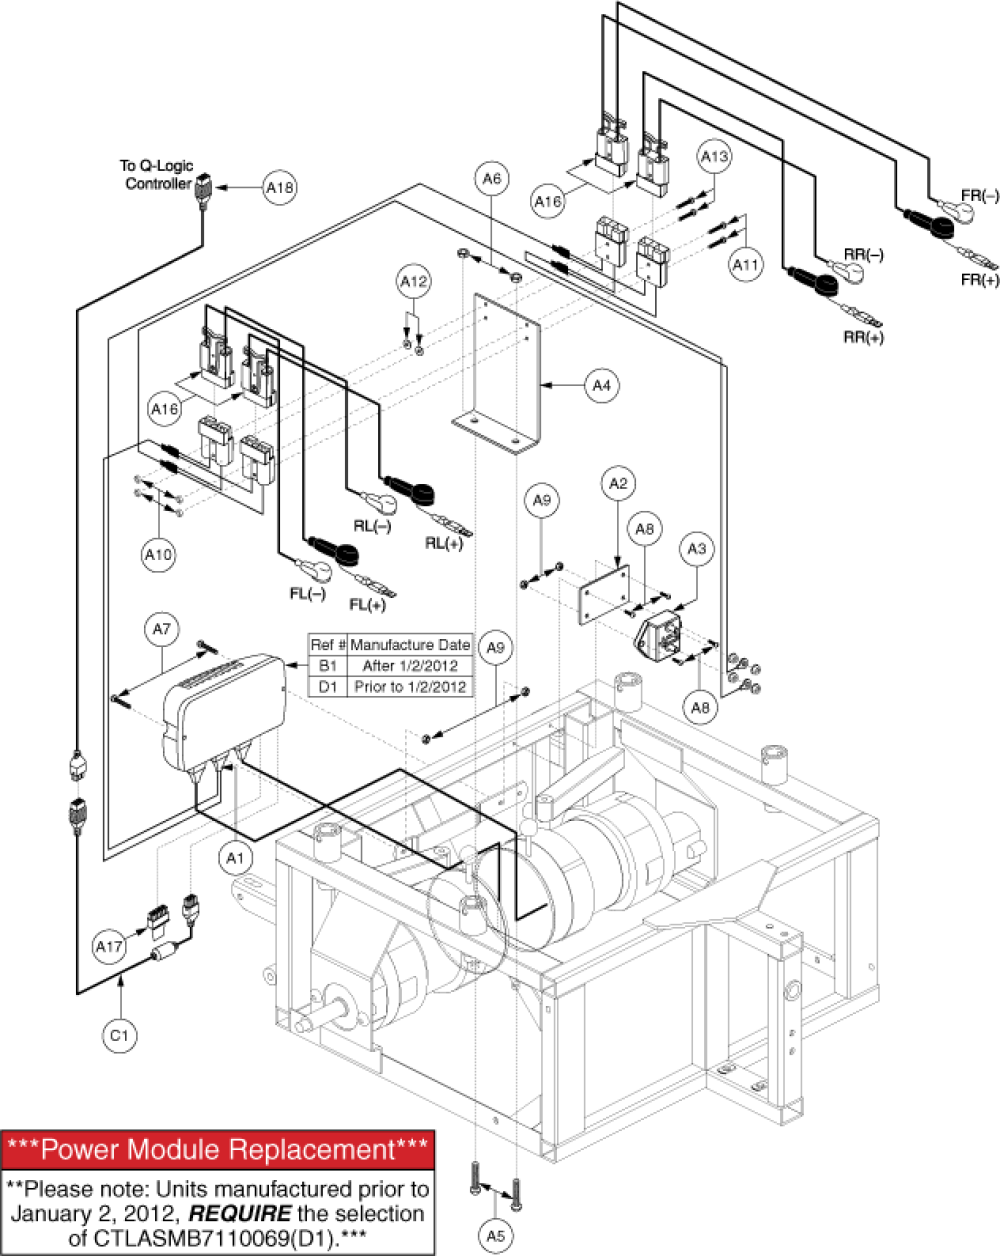 Utility Tray Assembly - Q-logic, 4-battery parts diagram